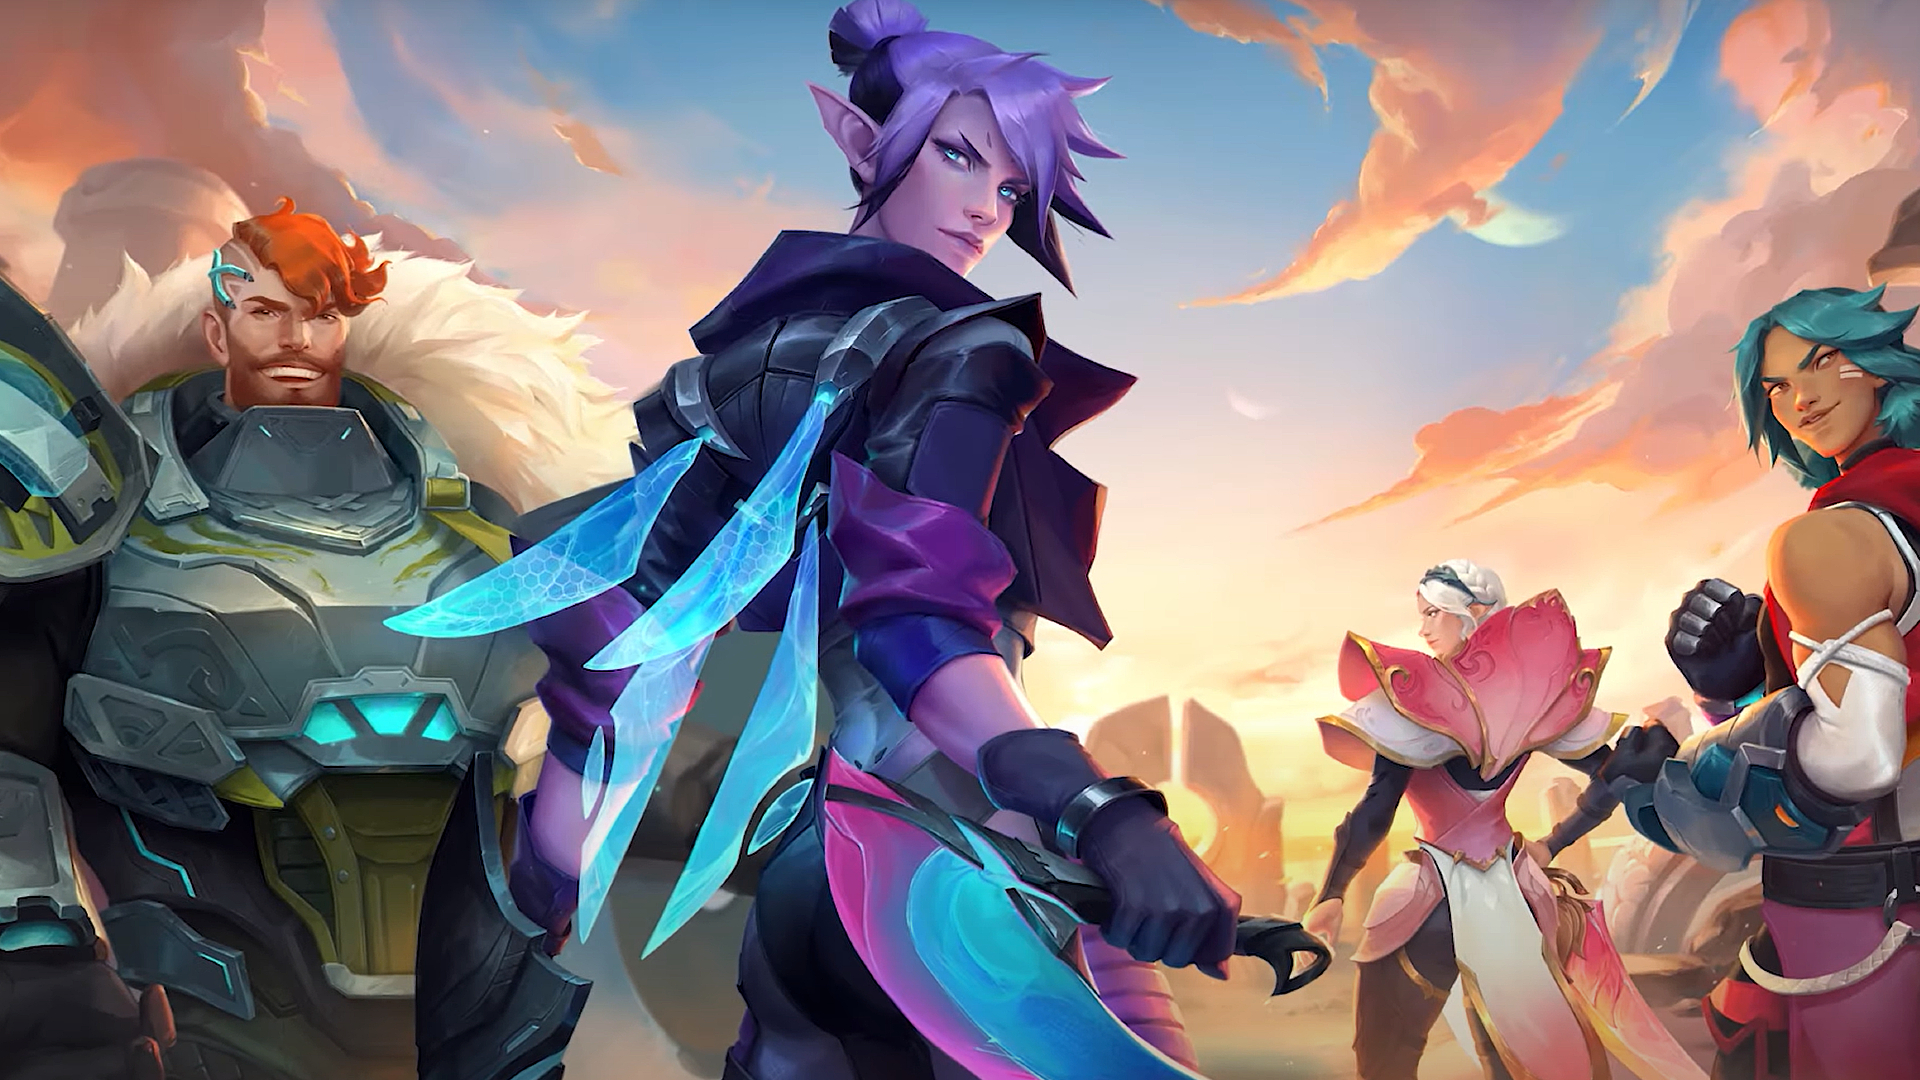 MOBA Evercore Heroes is League of Legends meets WoW